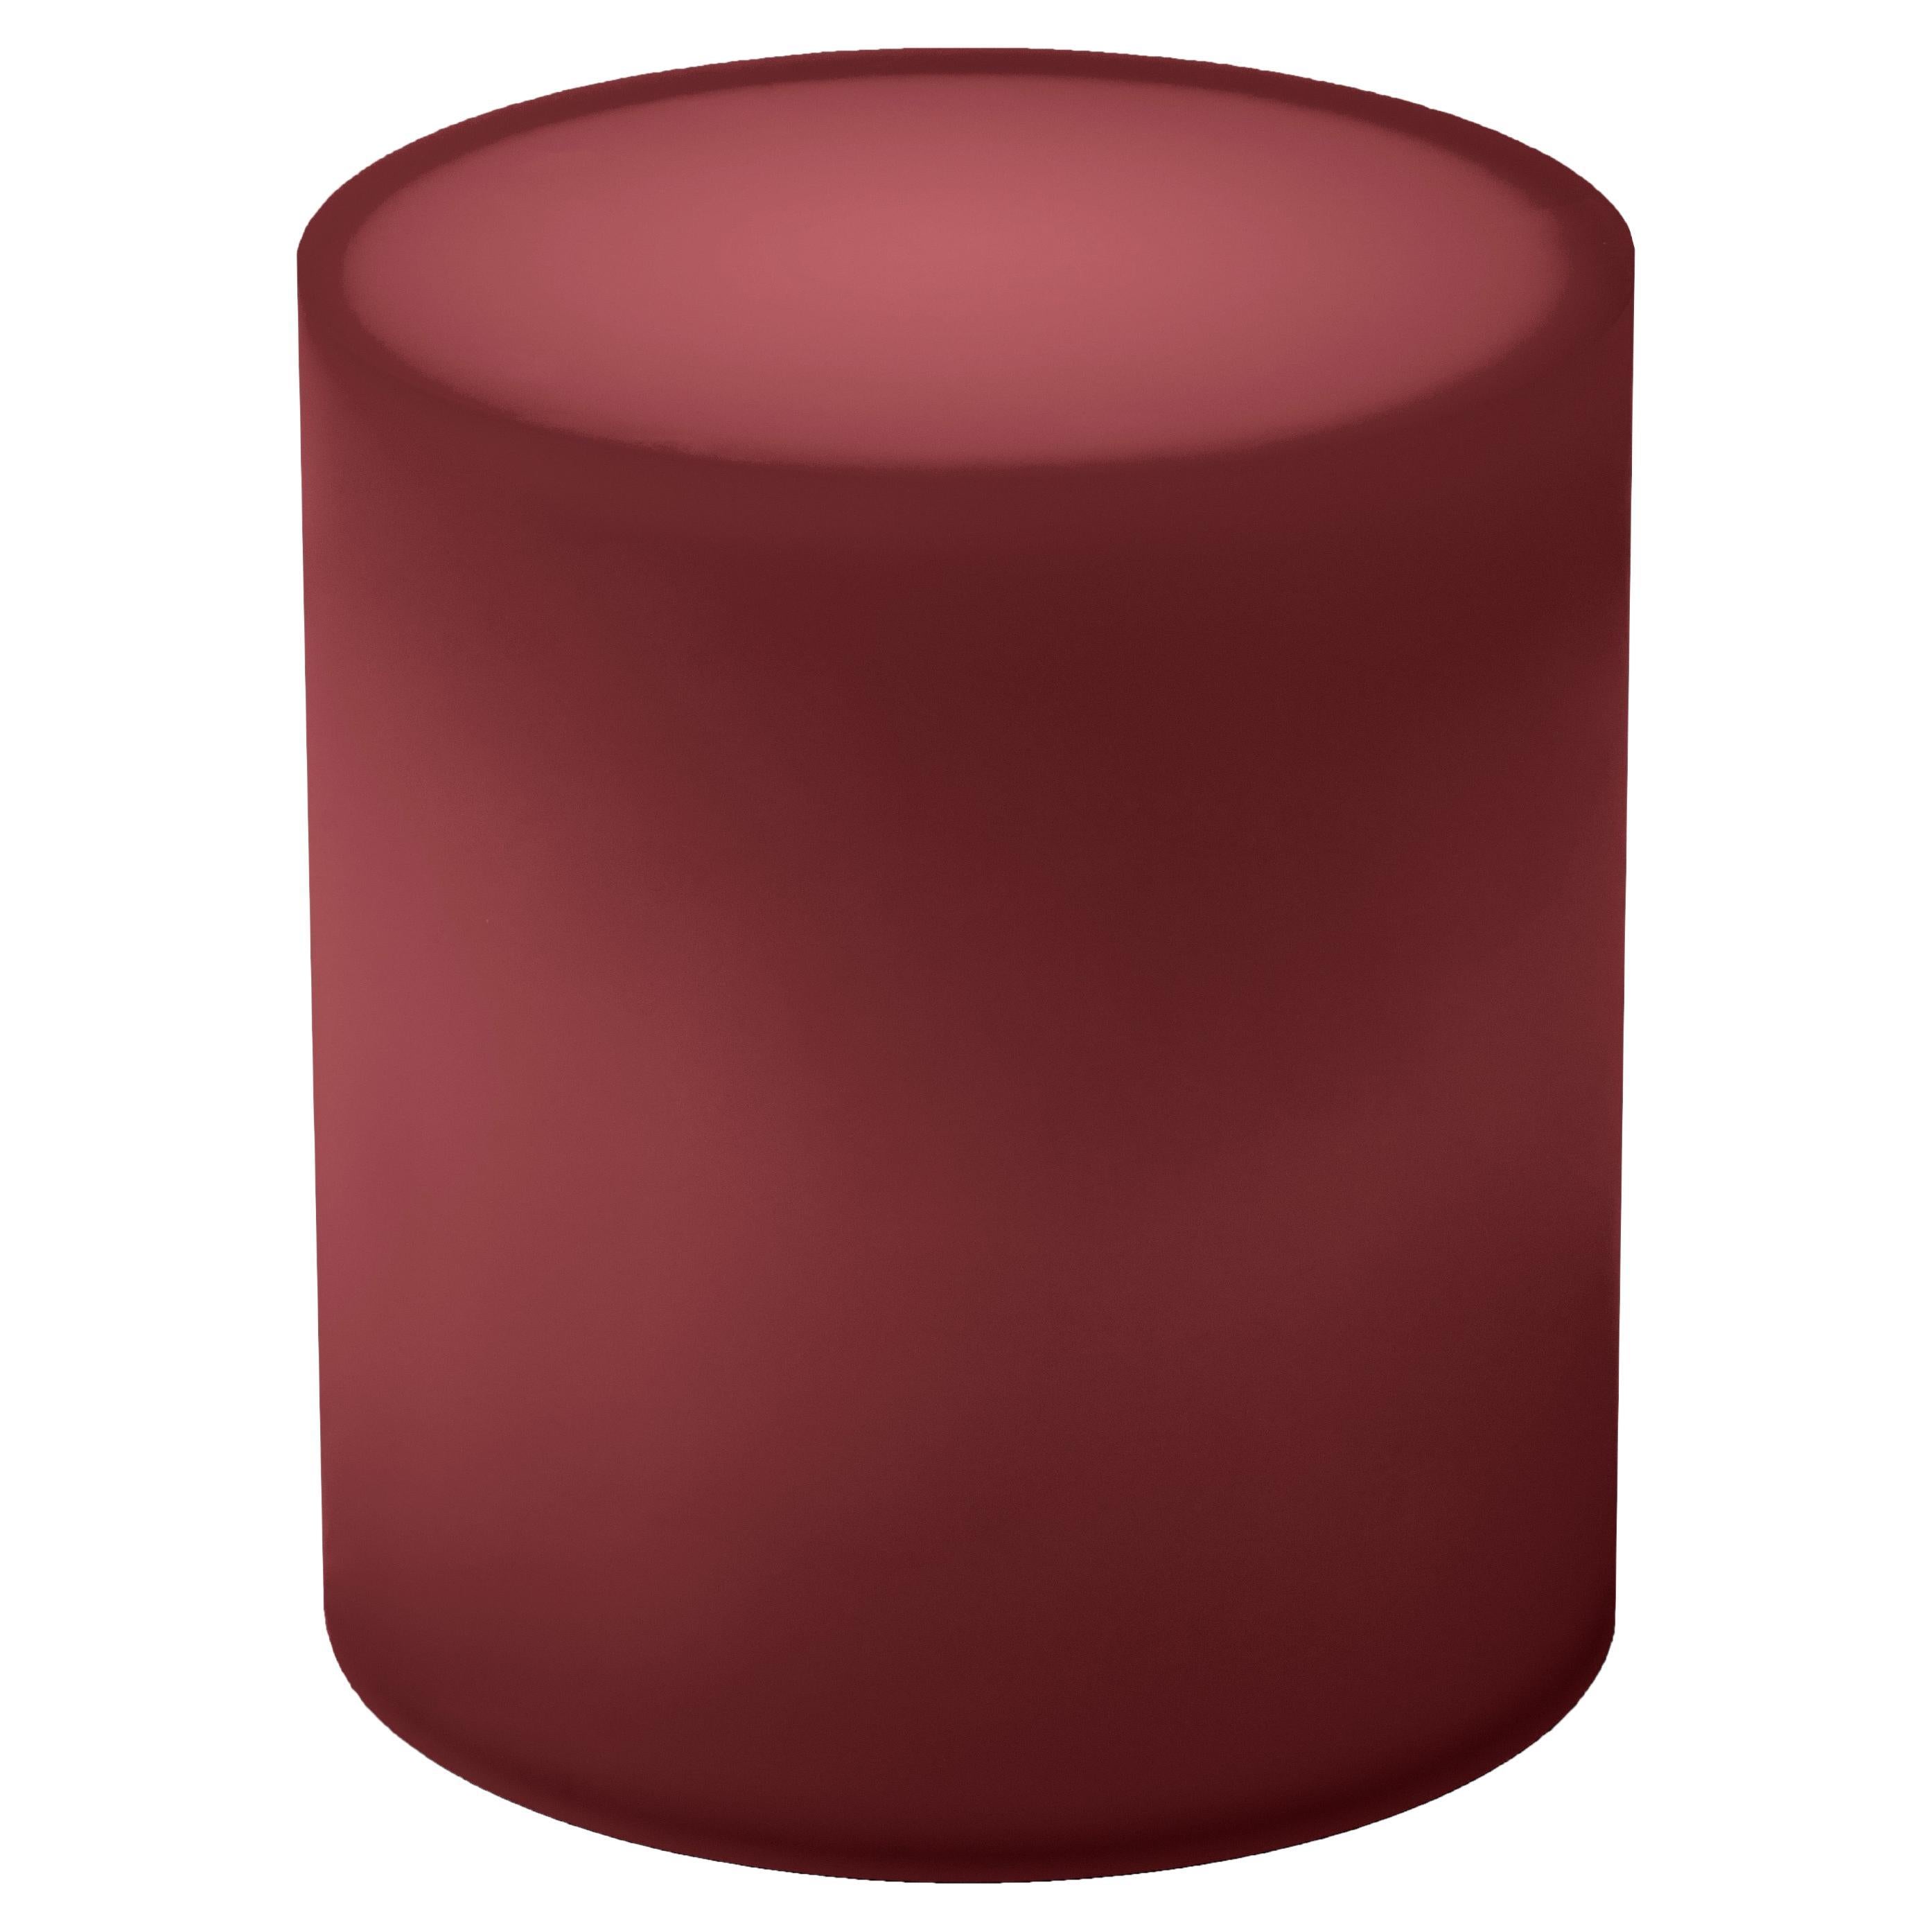 Drum Resin Side Table/Stool In Burgundy by Facture, REP by Tuleste Factory